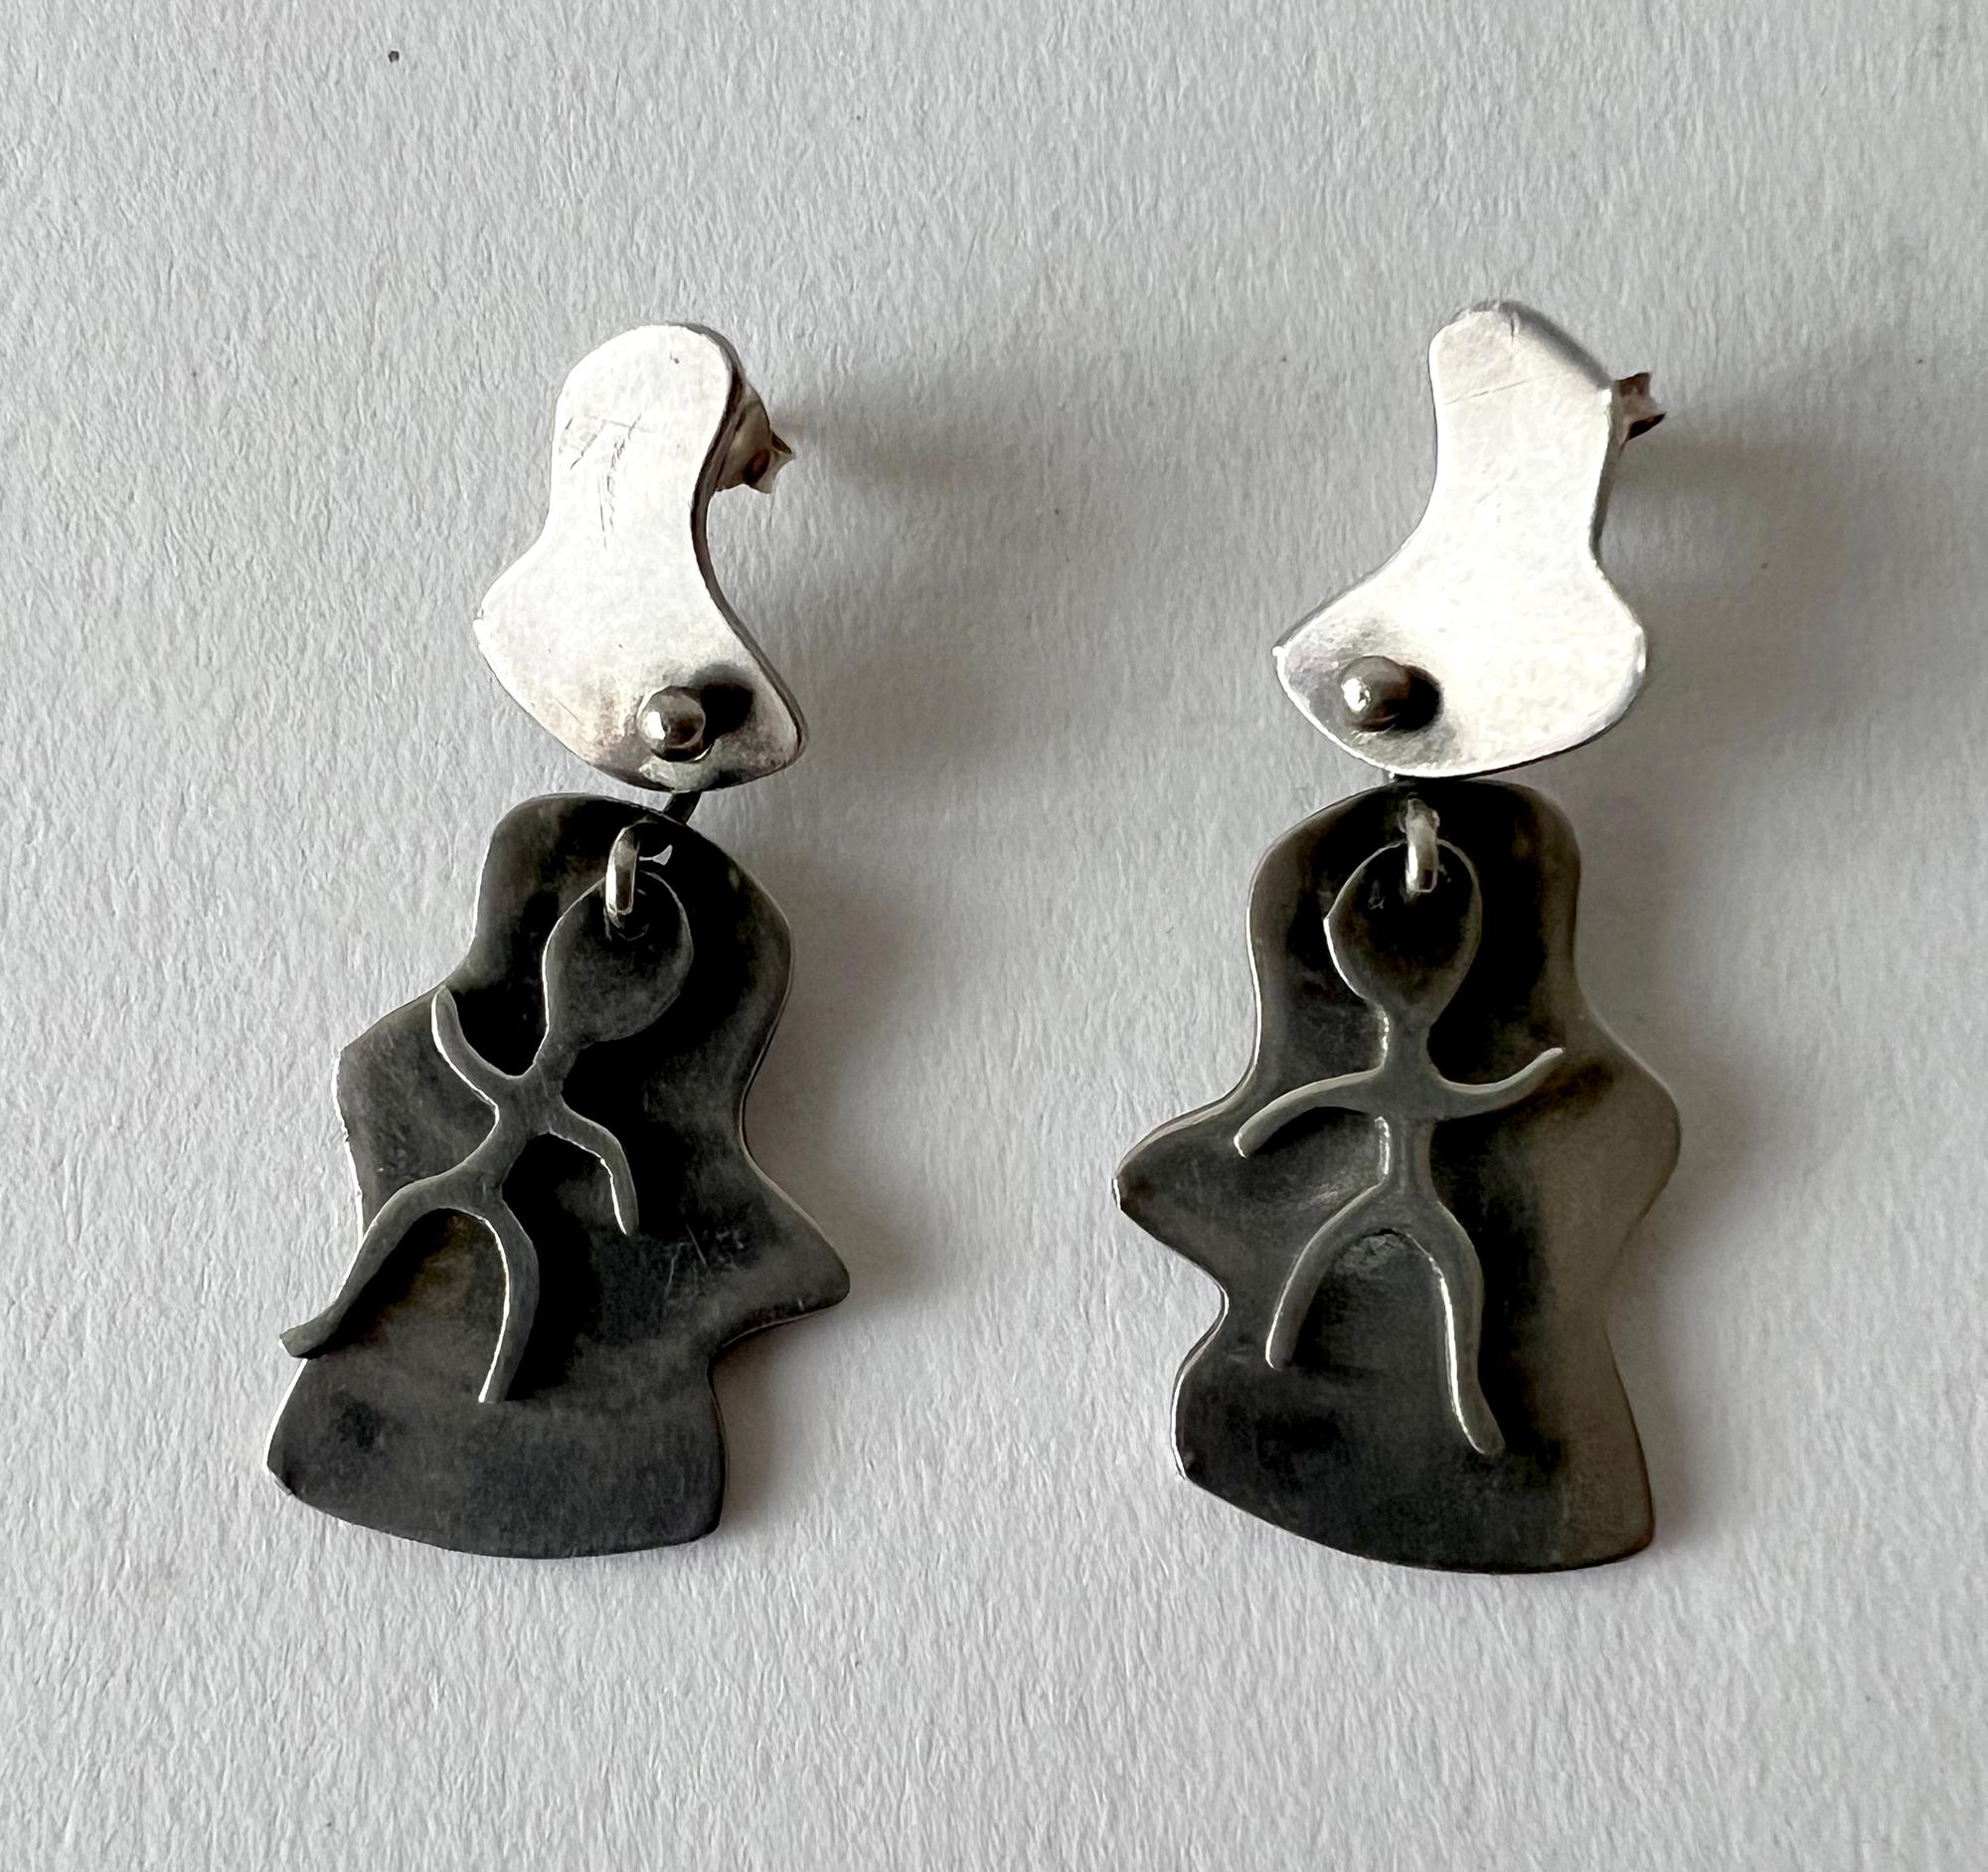 Kinteic dancer sterling silver earrings created by American modernist jeweler Jules Brenner, circa 1950's. Earrings are of the pierce variety and measure 1.75